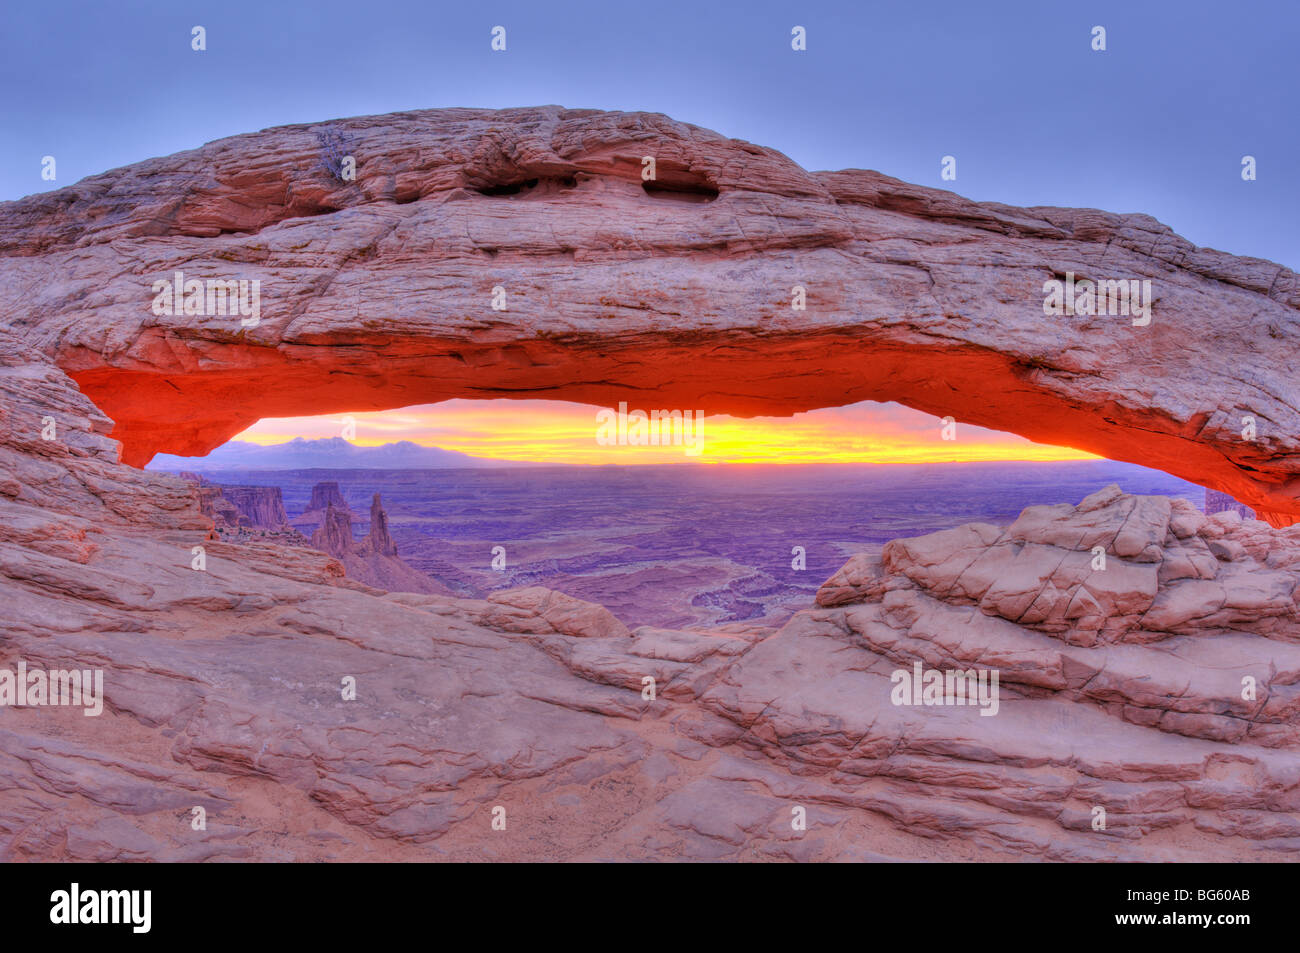 Sunrise on Mesa Arch, Island in the Sky, Canyonlands National Park, Utah Stock Photo